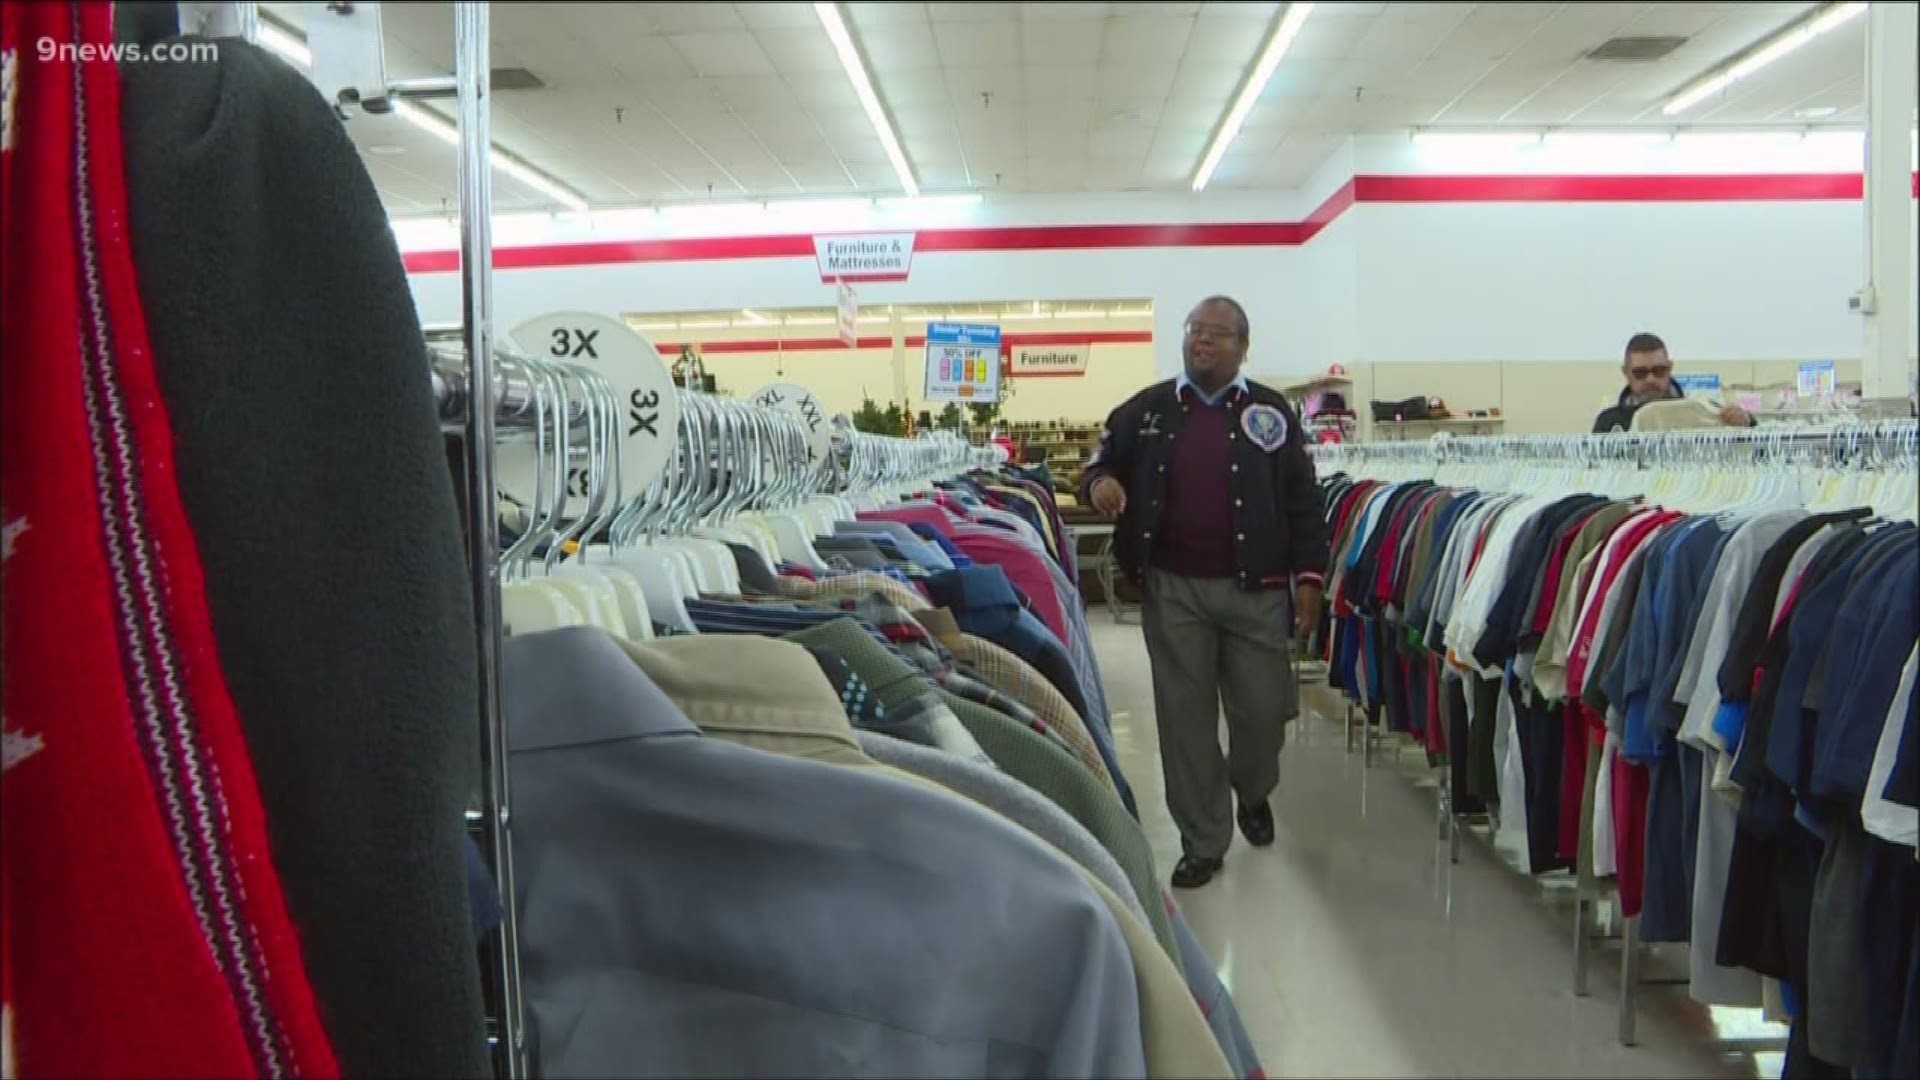 Donations of clothes and household items will go to ARC thrift stores. They are one of Colorado’s  largest employers of people with autism, down syndrome, and cerebr